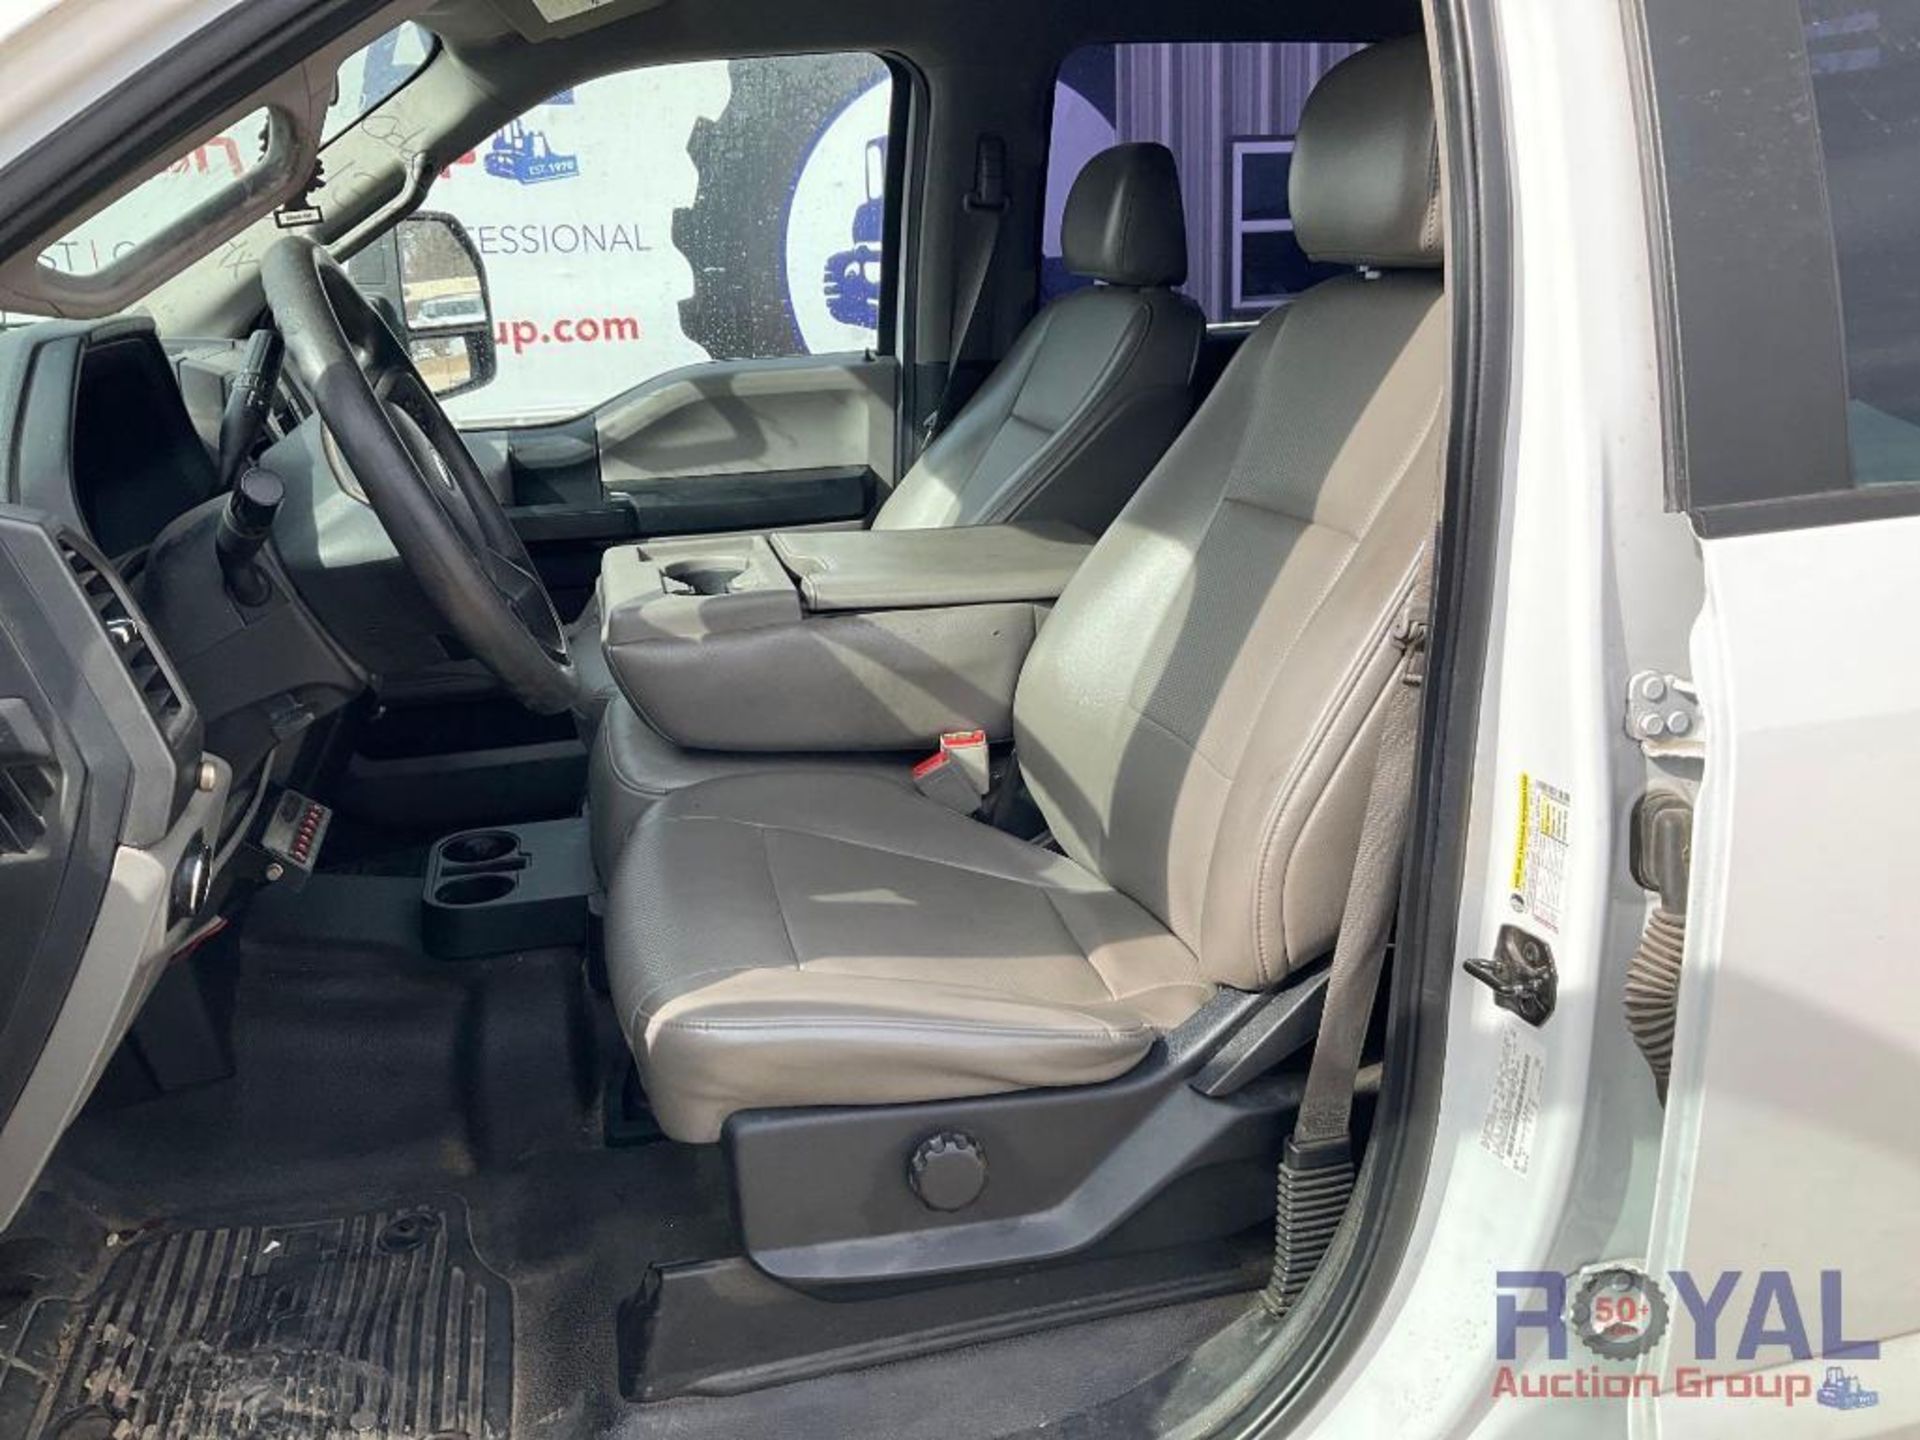 2019 Ford F250 4x4 Crew Cab Pickup Truck - Image 18 of 27